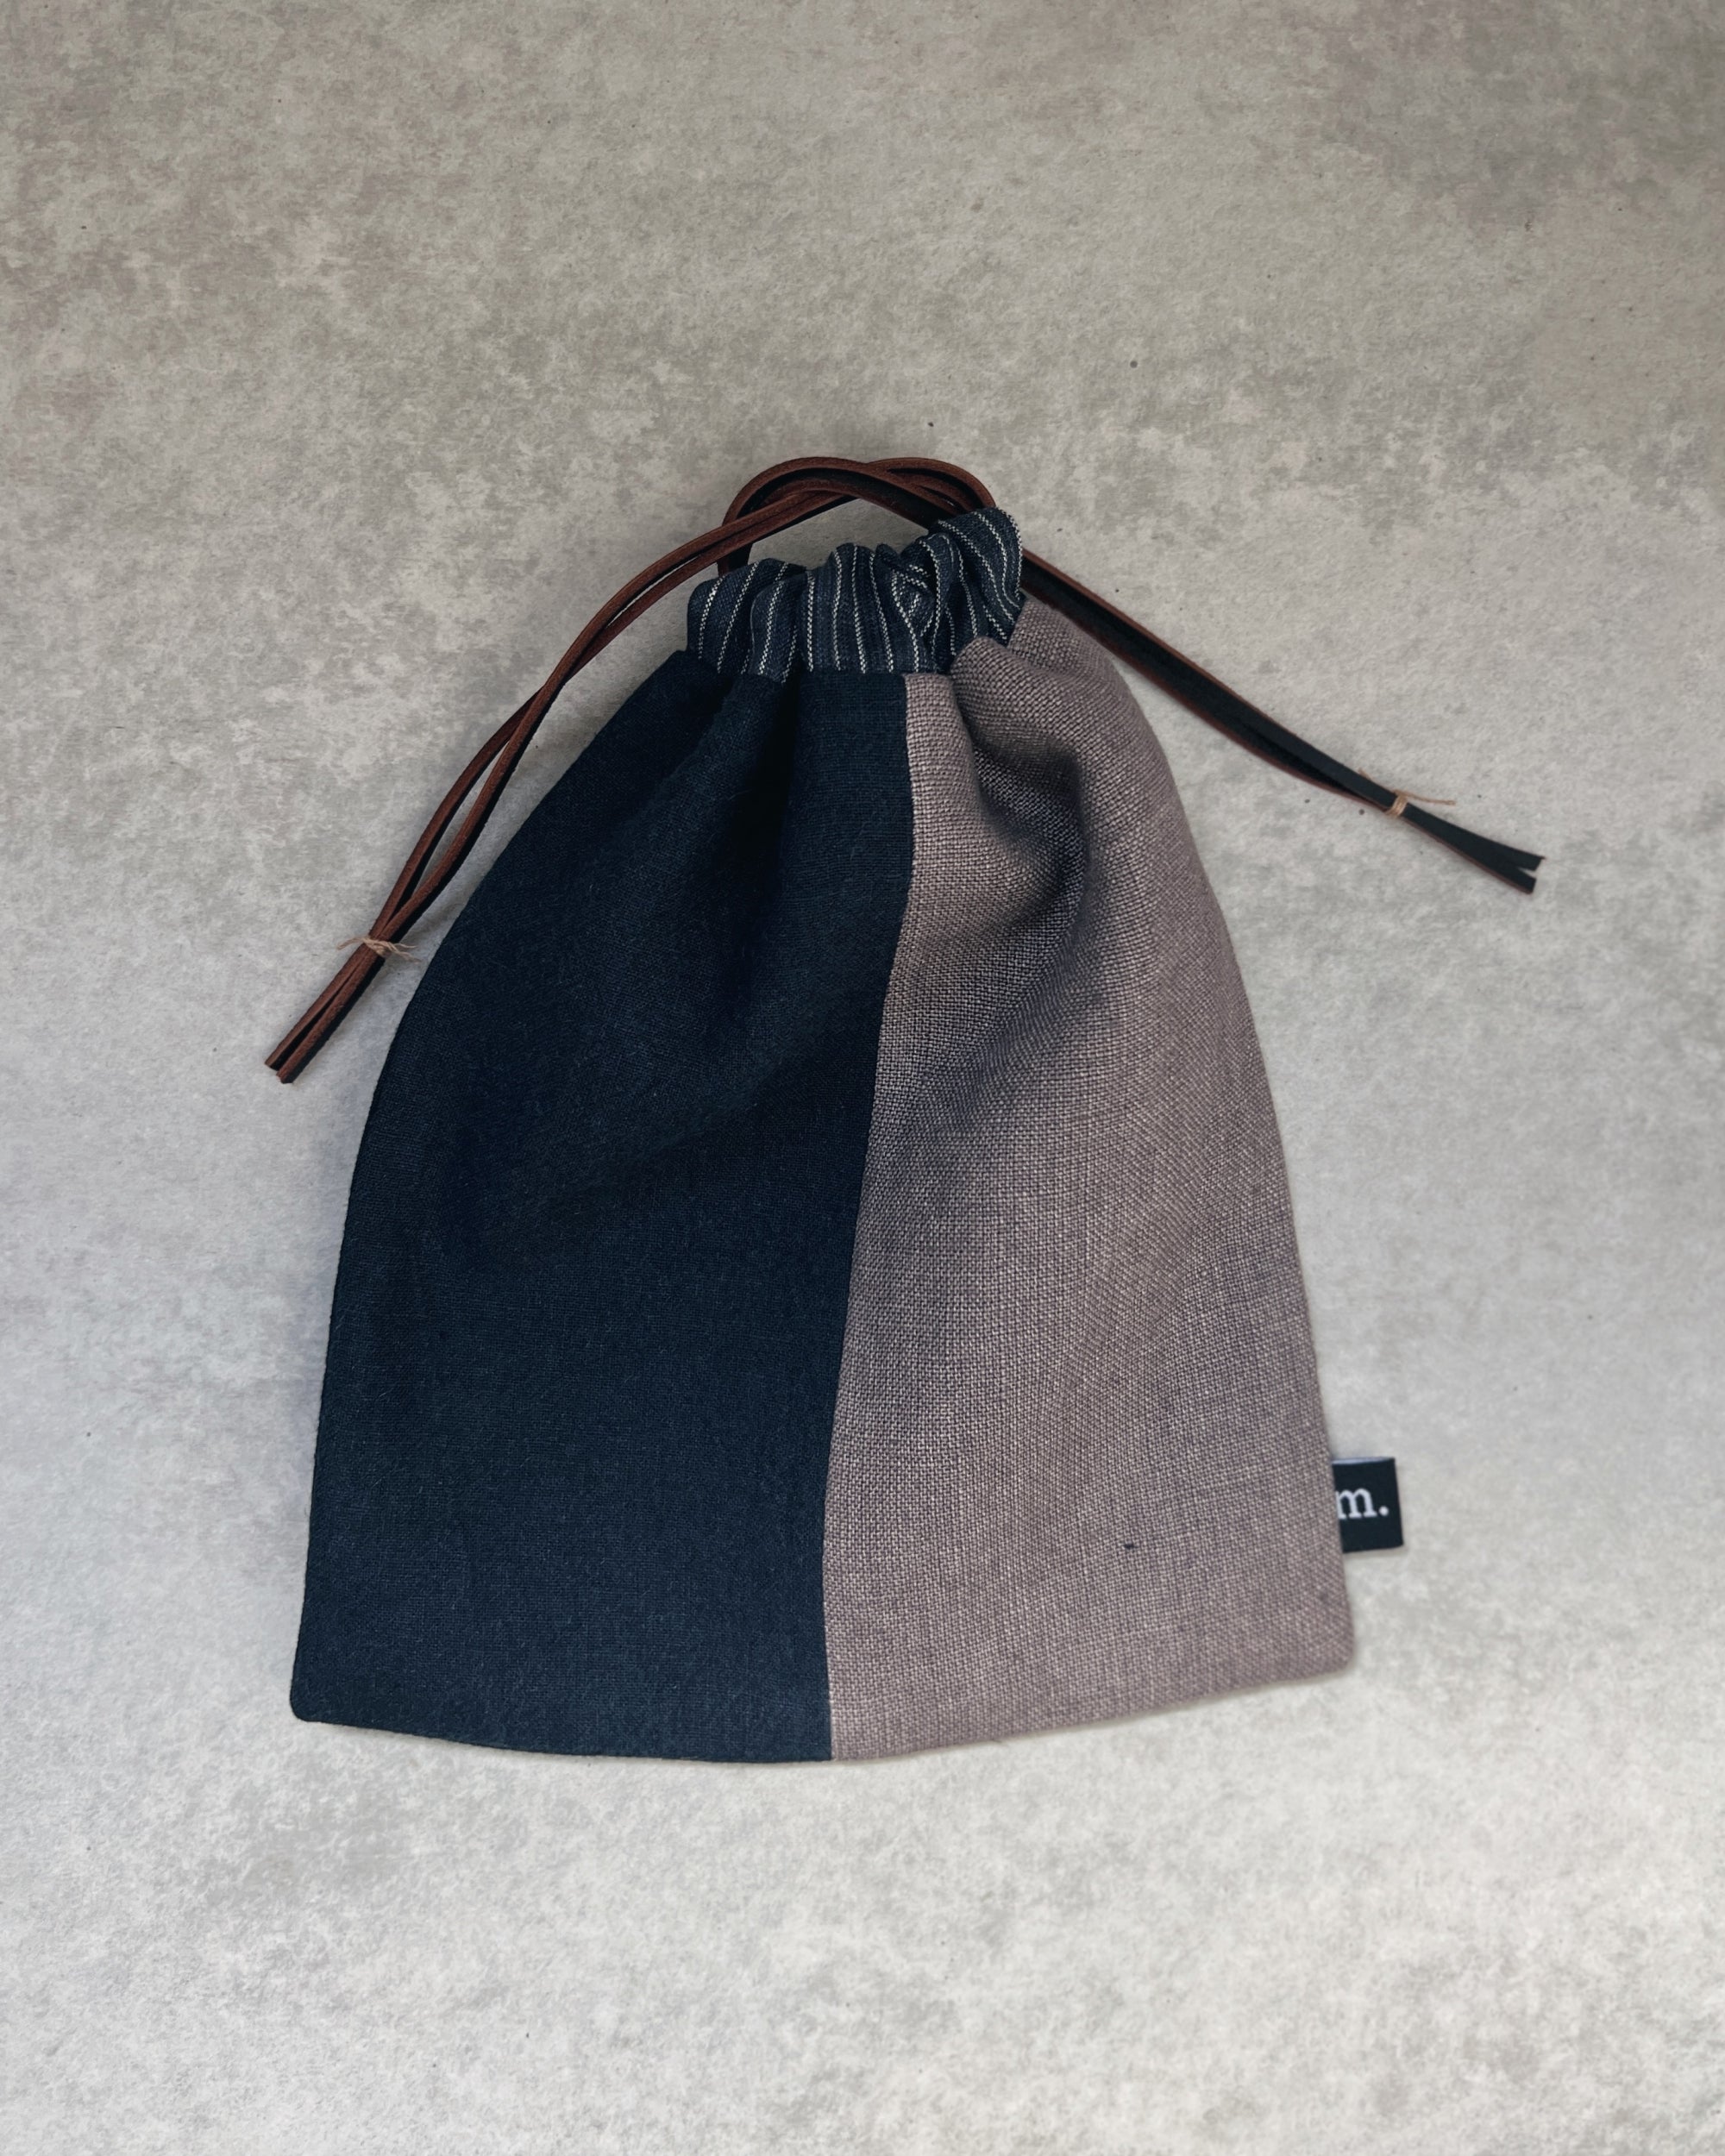 Hand sewn linen and cotton kit bag, made in Tasmania